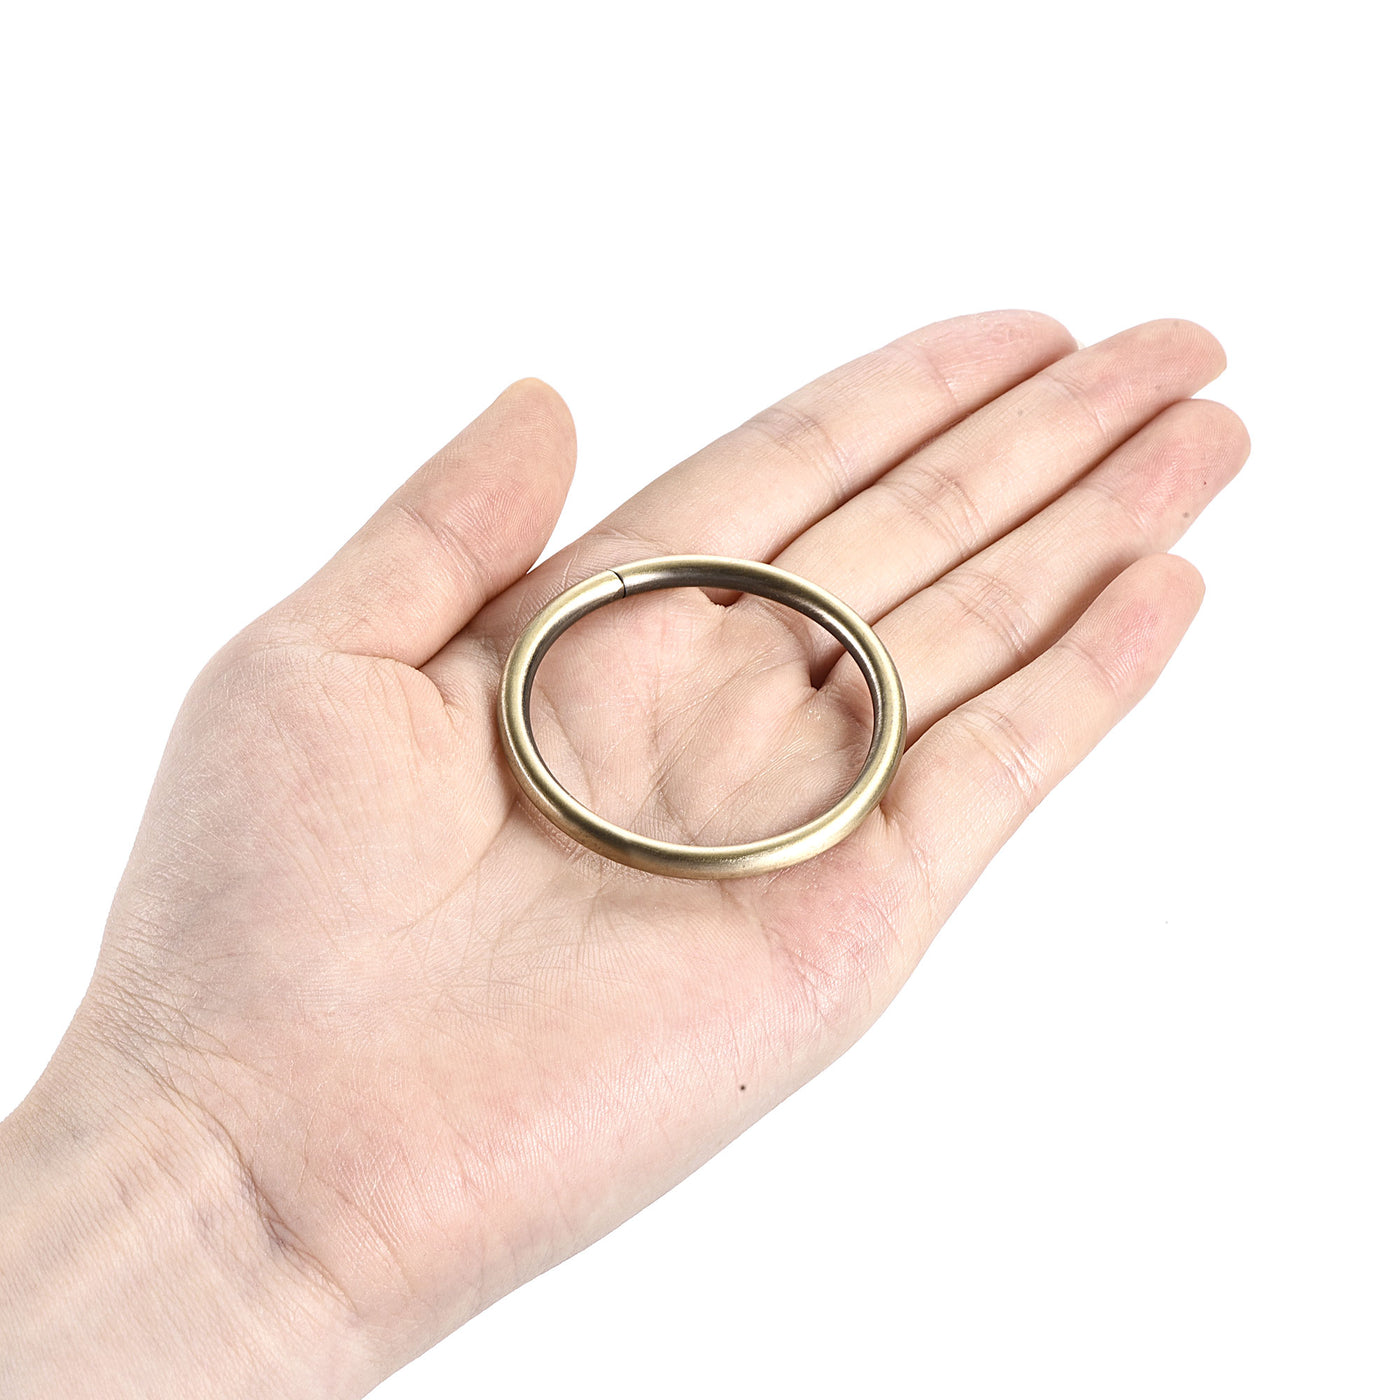 uxcell Uxcell Metal O Ring 38mm ID 3.8mm Thickness Non-Welded Rings Bronze Tone 15pcs